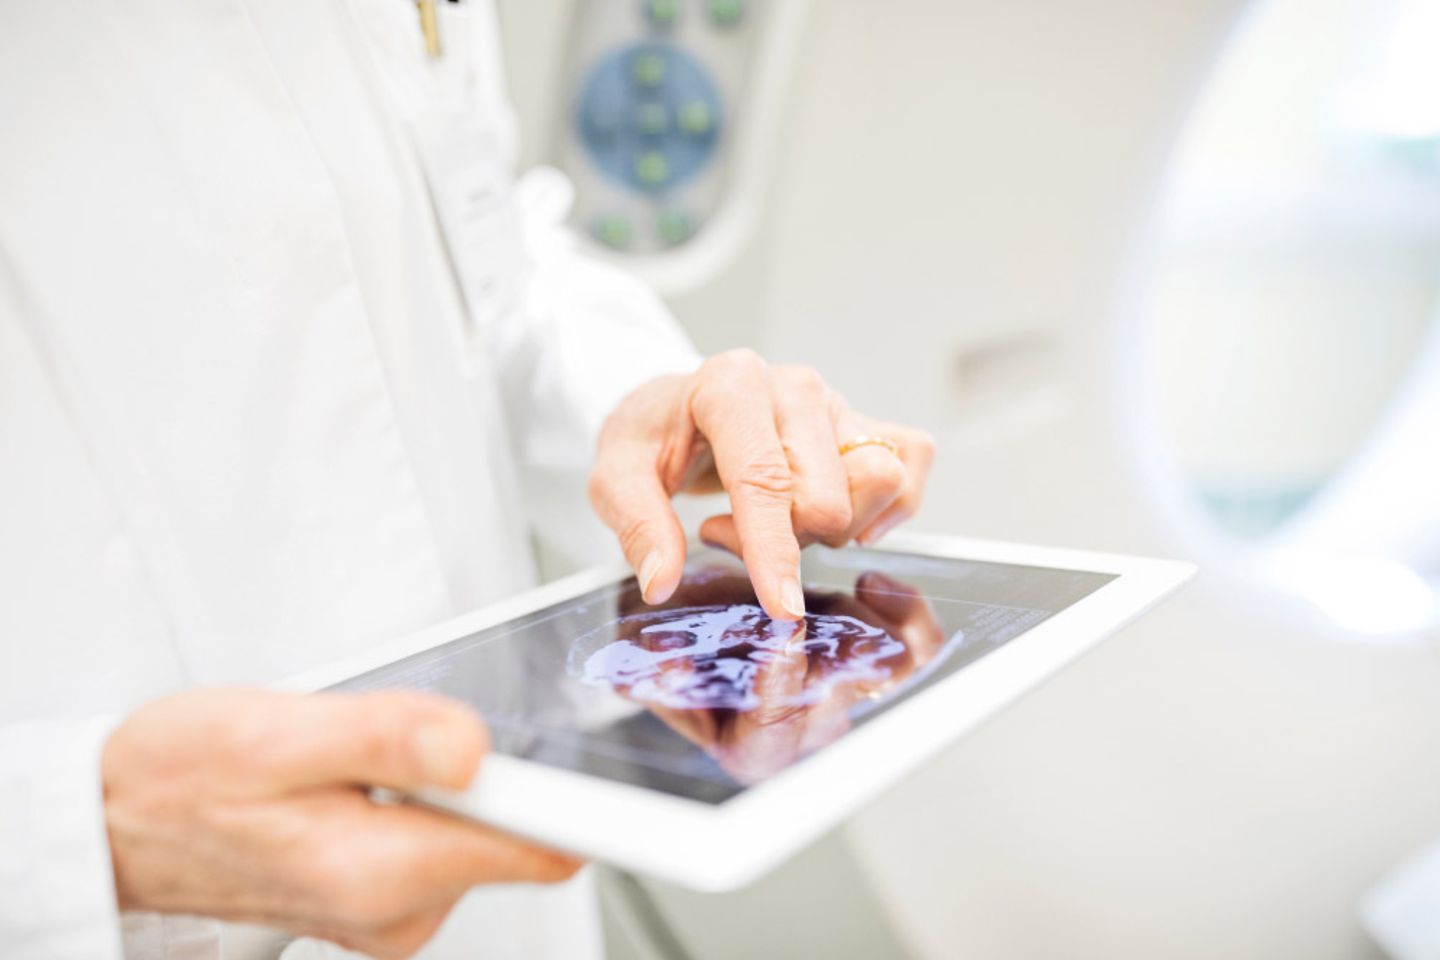 Doctor analysing X-ray image on tablet